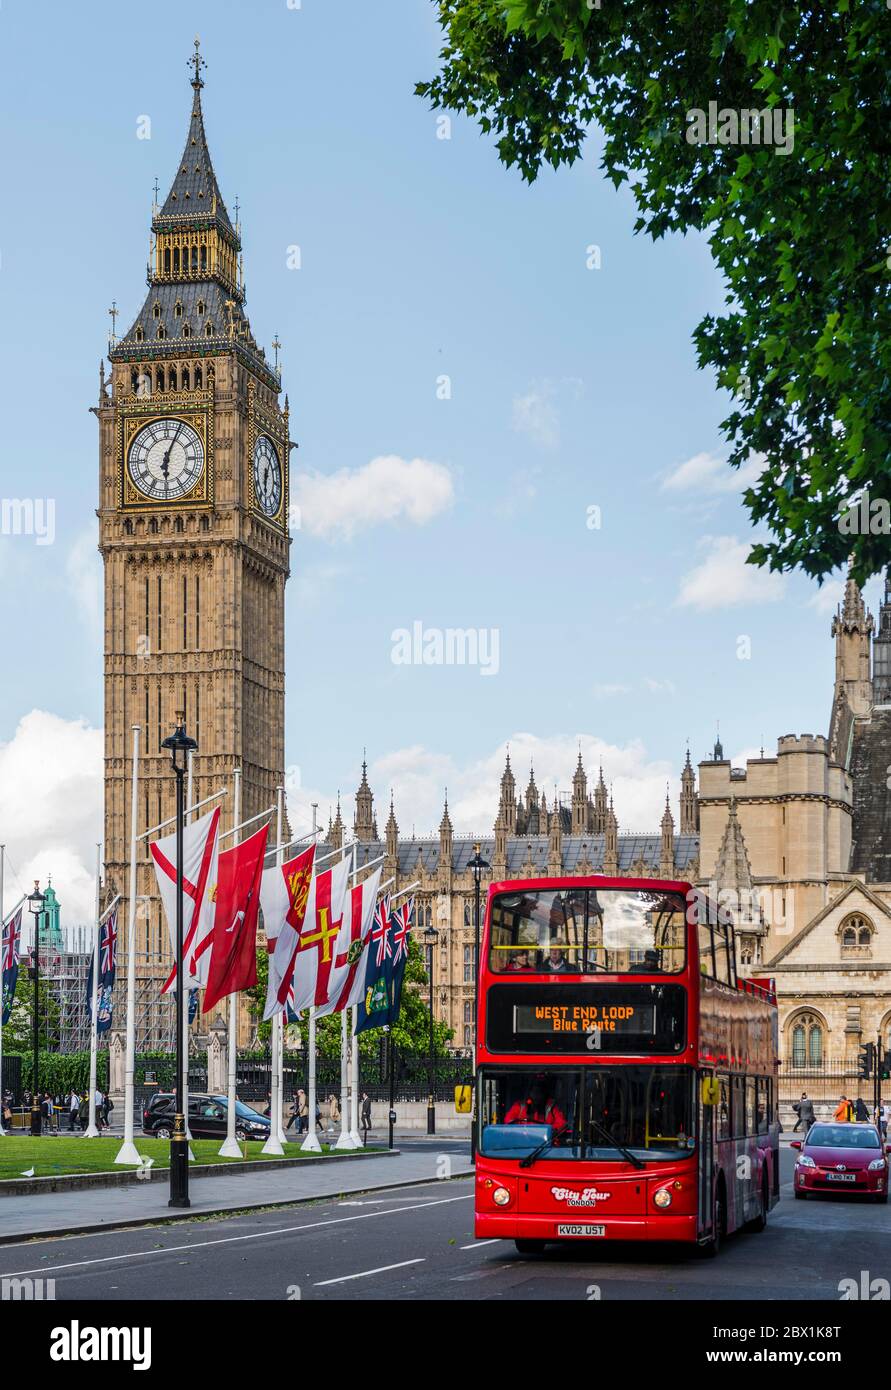 Red Double Decker Bus, Palace of Westminster, Houses of Parliament, Big Ben, City of Westminster, London, England, United Kingdom Stock Photo